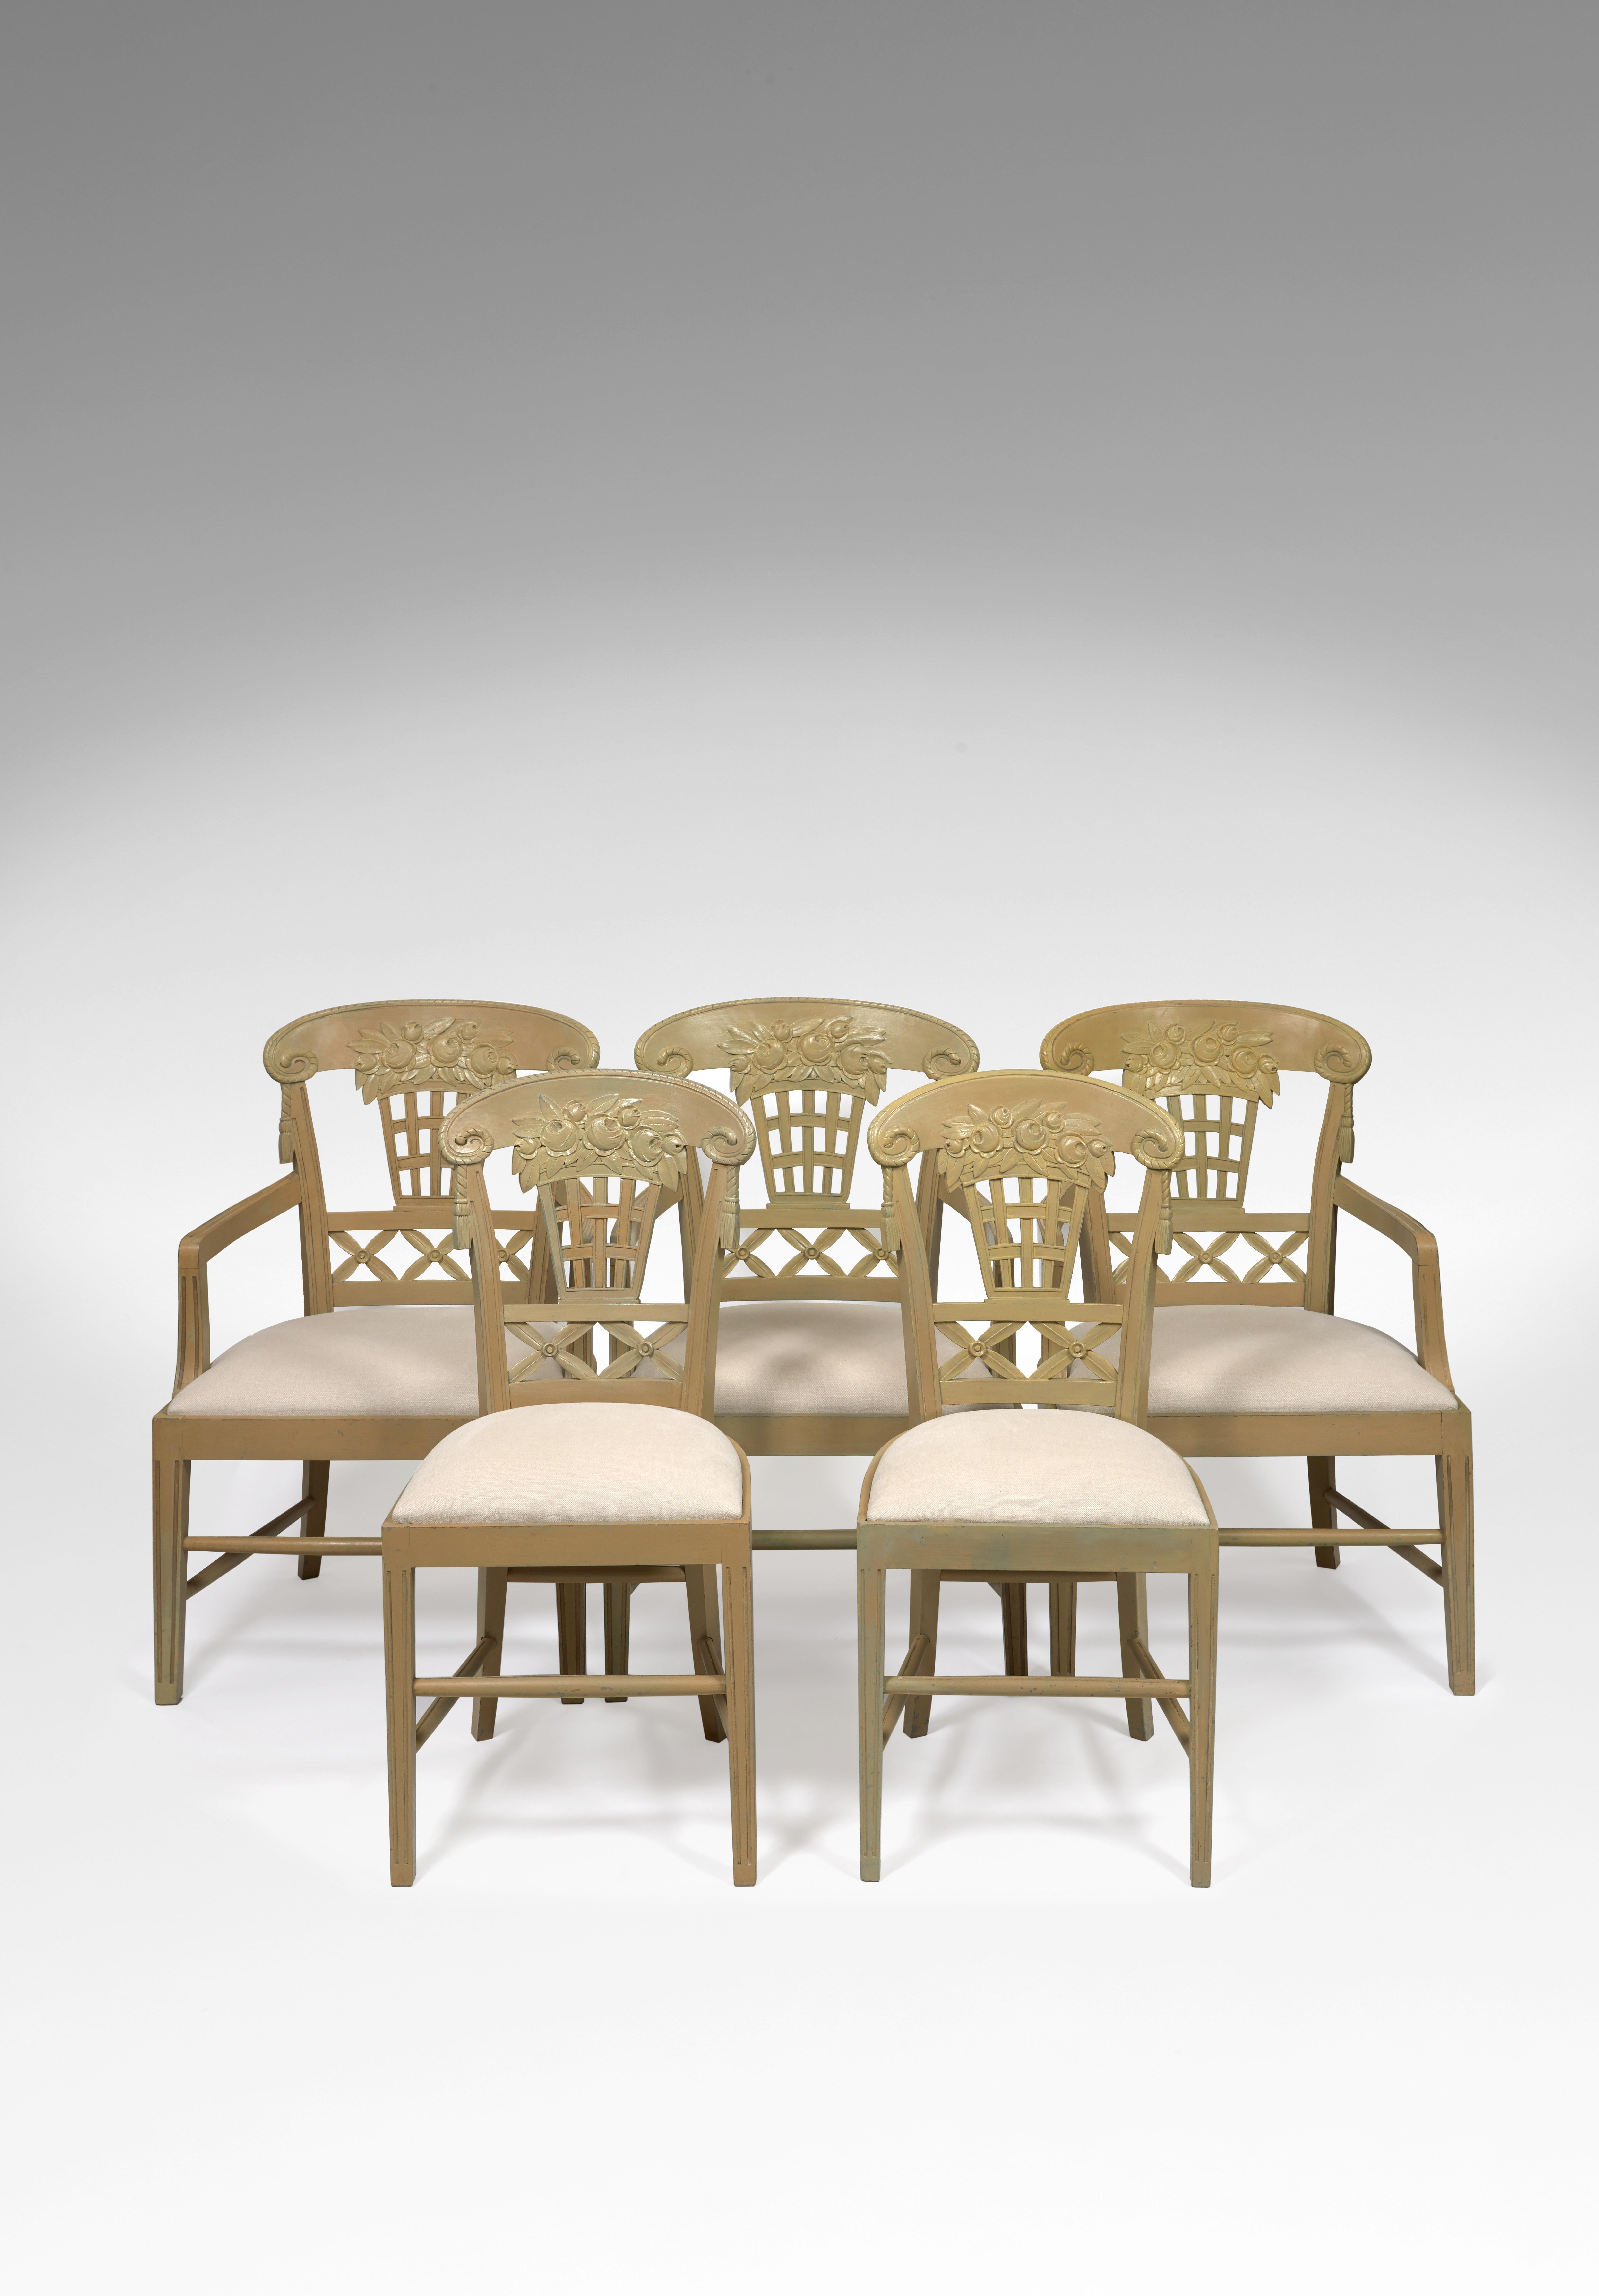 Art Deco André Groult, Set of Two Chairs Carved from Louis Sue's Drawings, circa 1912